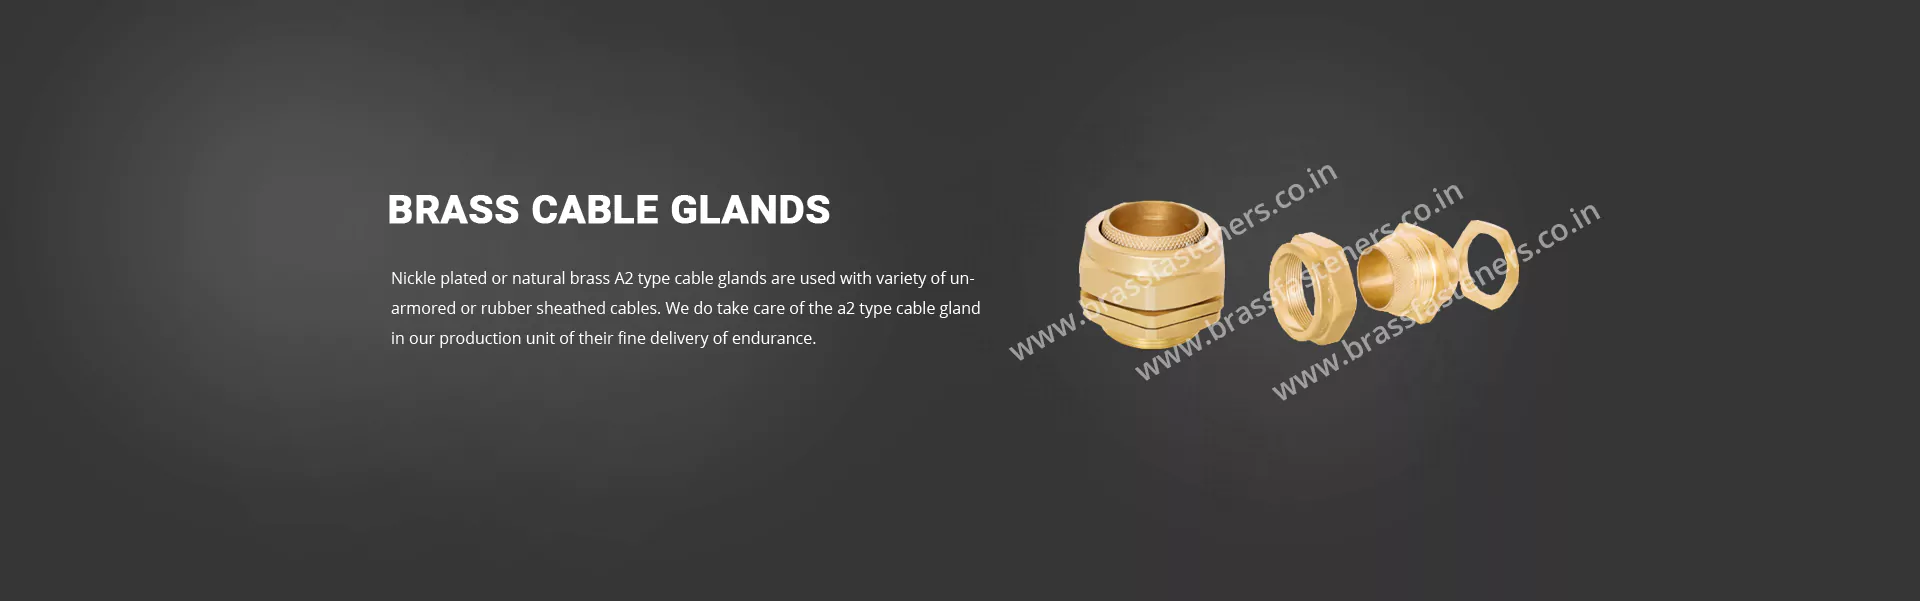 Cable Glands India